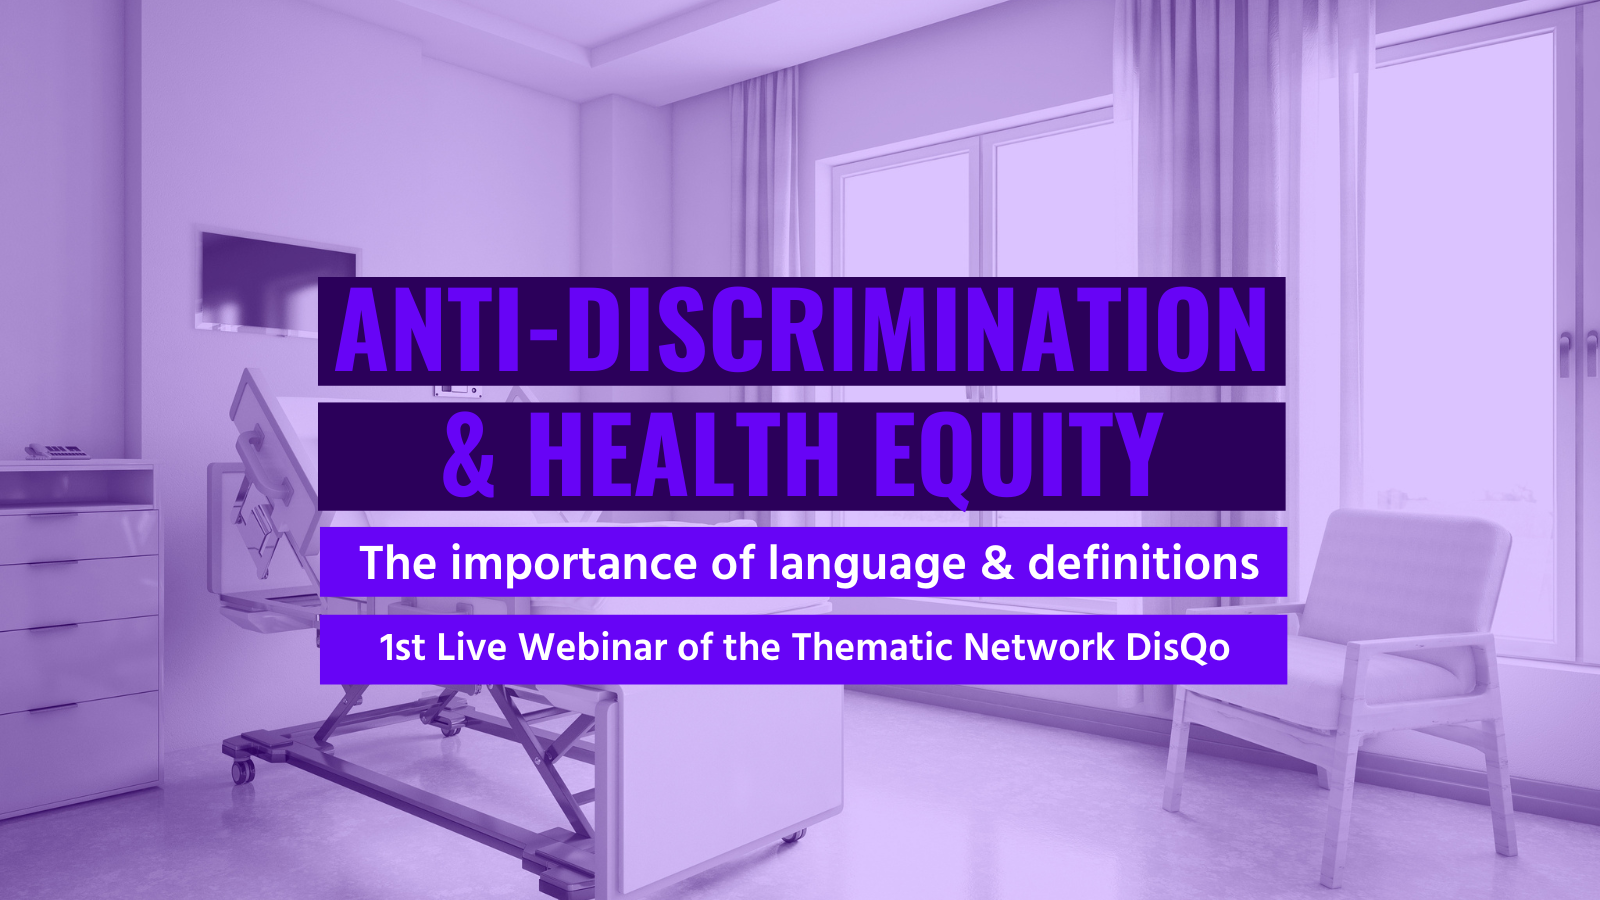 Anti-discrimination and health equity